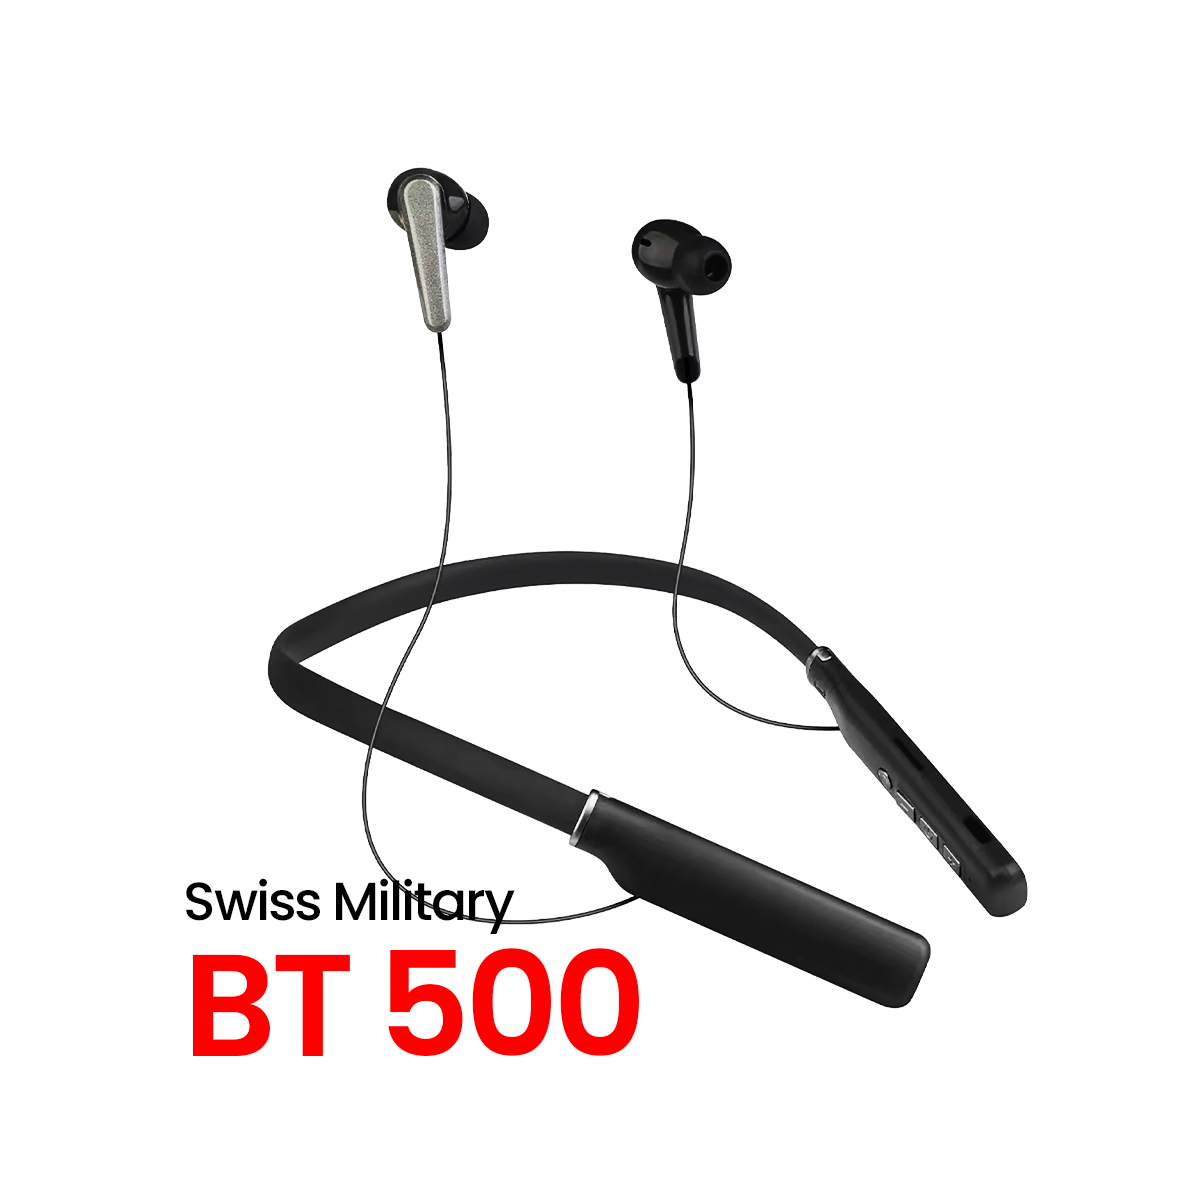 BT 500 - THE ULTIMATE ON-THE-GO MUSIC COMPANION!